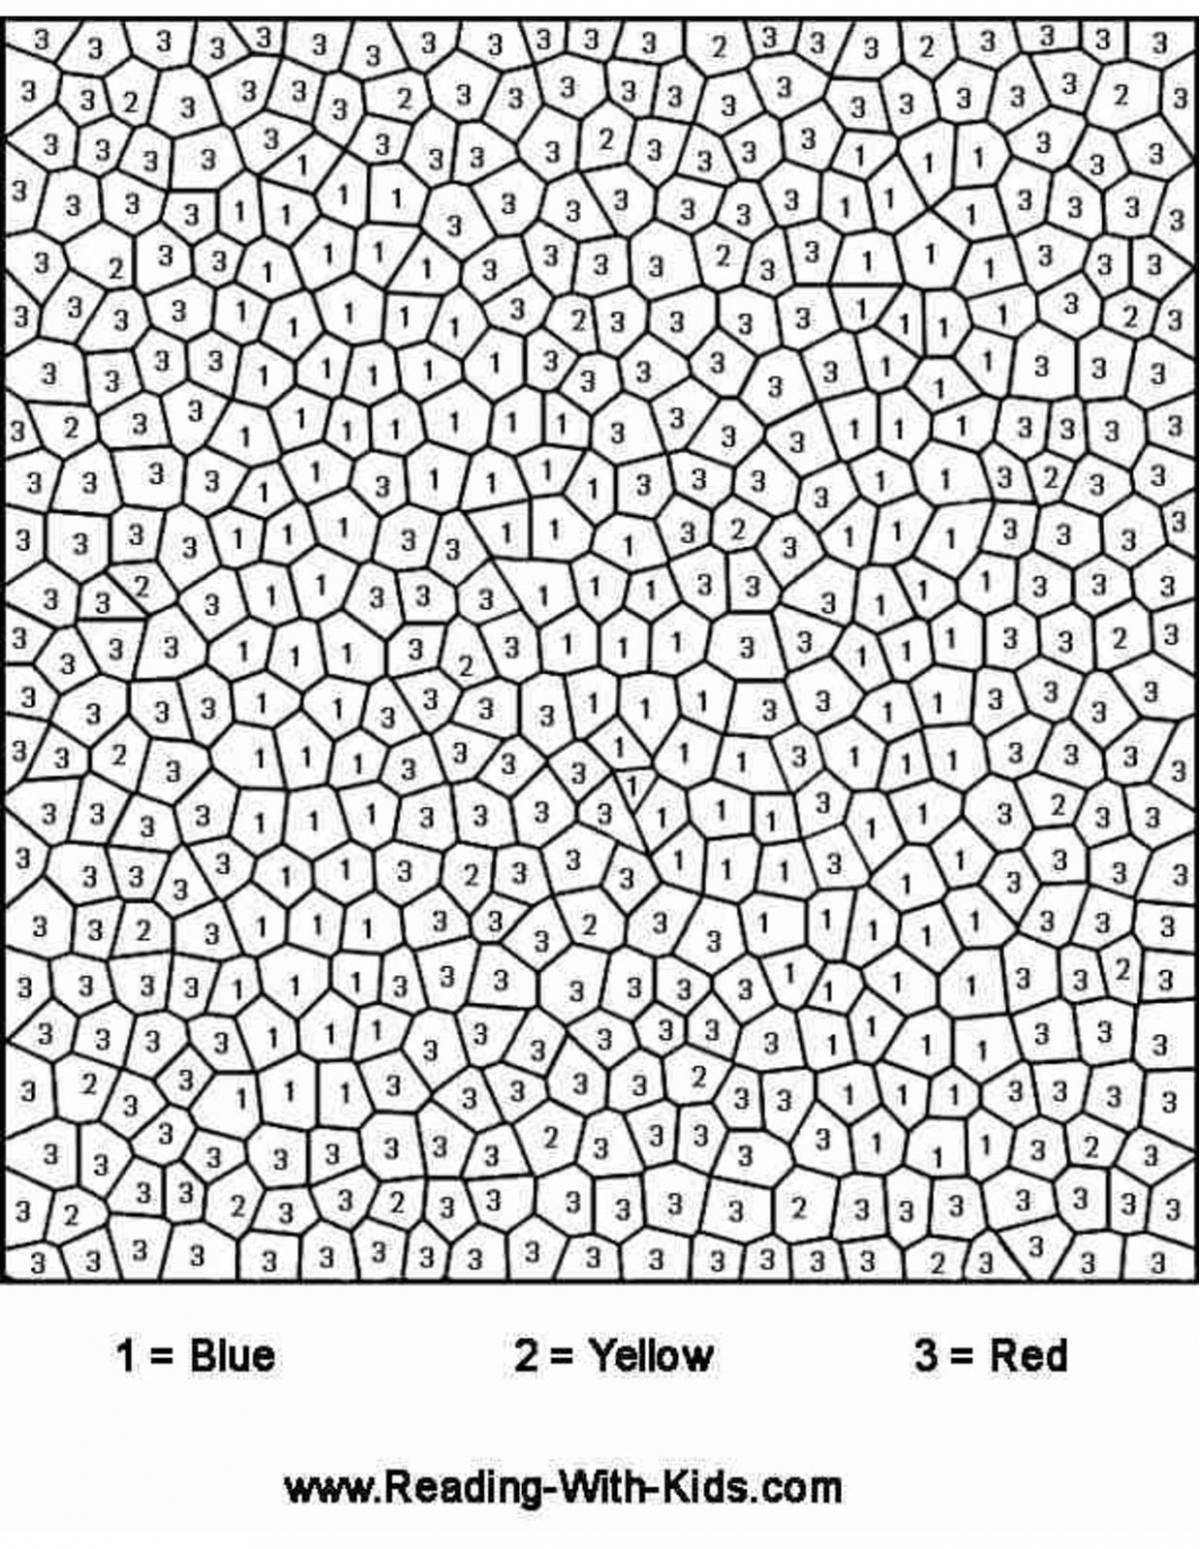 Bright coloring game by cells and numbers